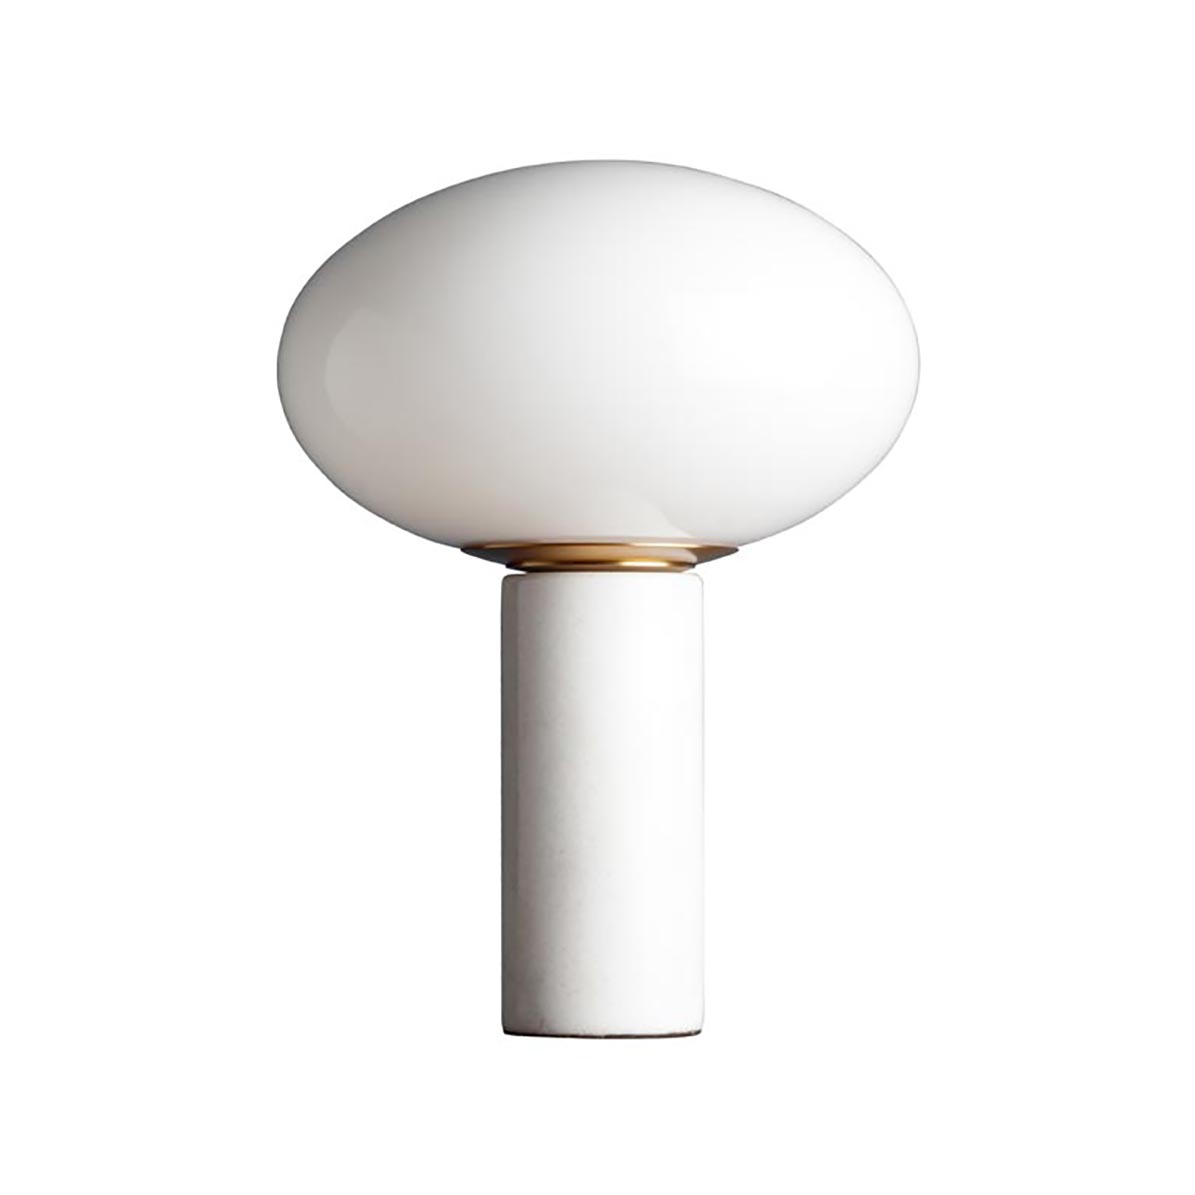 OVOIDE TABLE LAMP